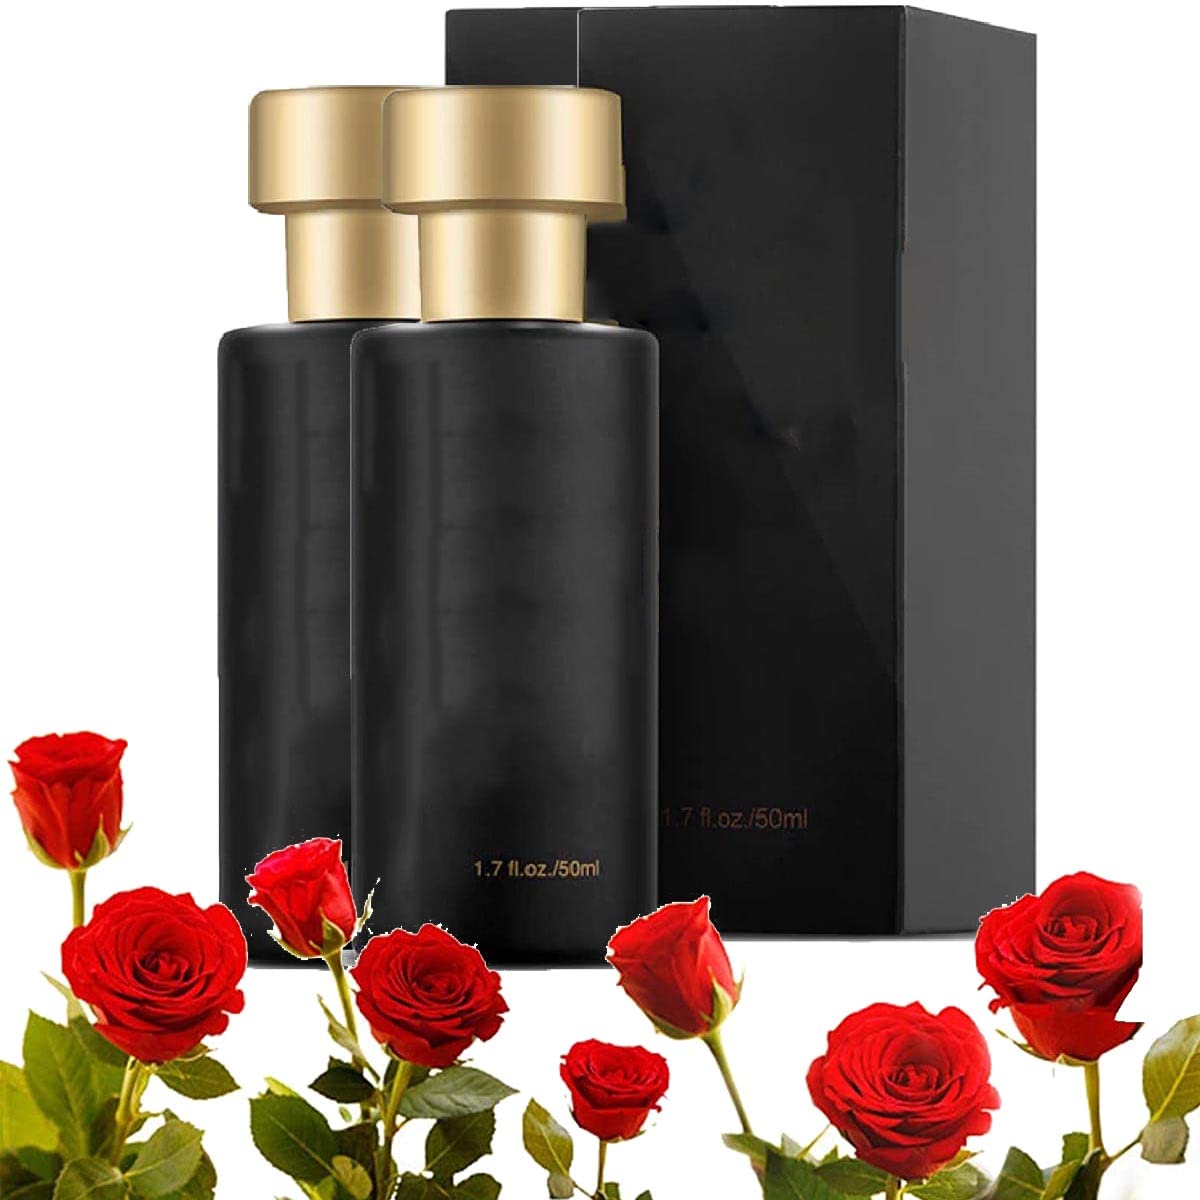 LSNTUU Lure Her Perfume for Men,Lure Her Cologne for Men,Lure for